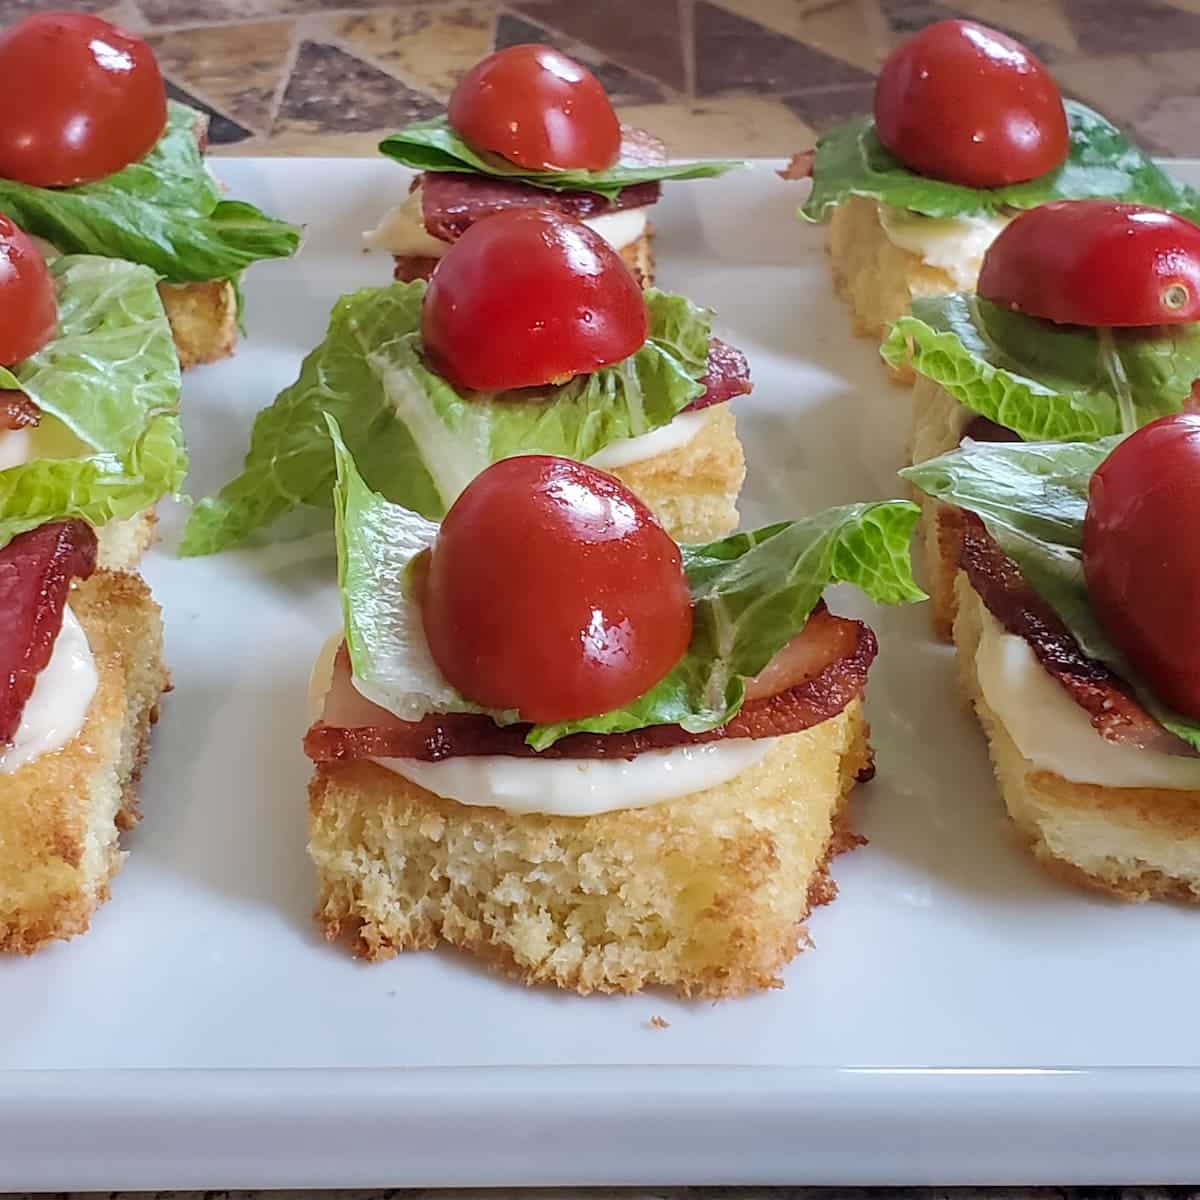 Bite sized BLT appetizer recipe from cleveland cooking.com. Brioche bread, bacon, lettuce and tomato in a bite sized portion!